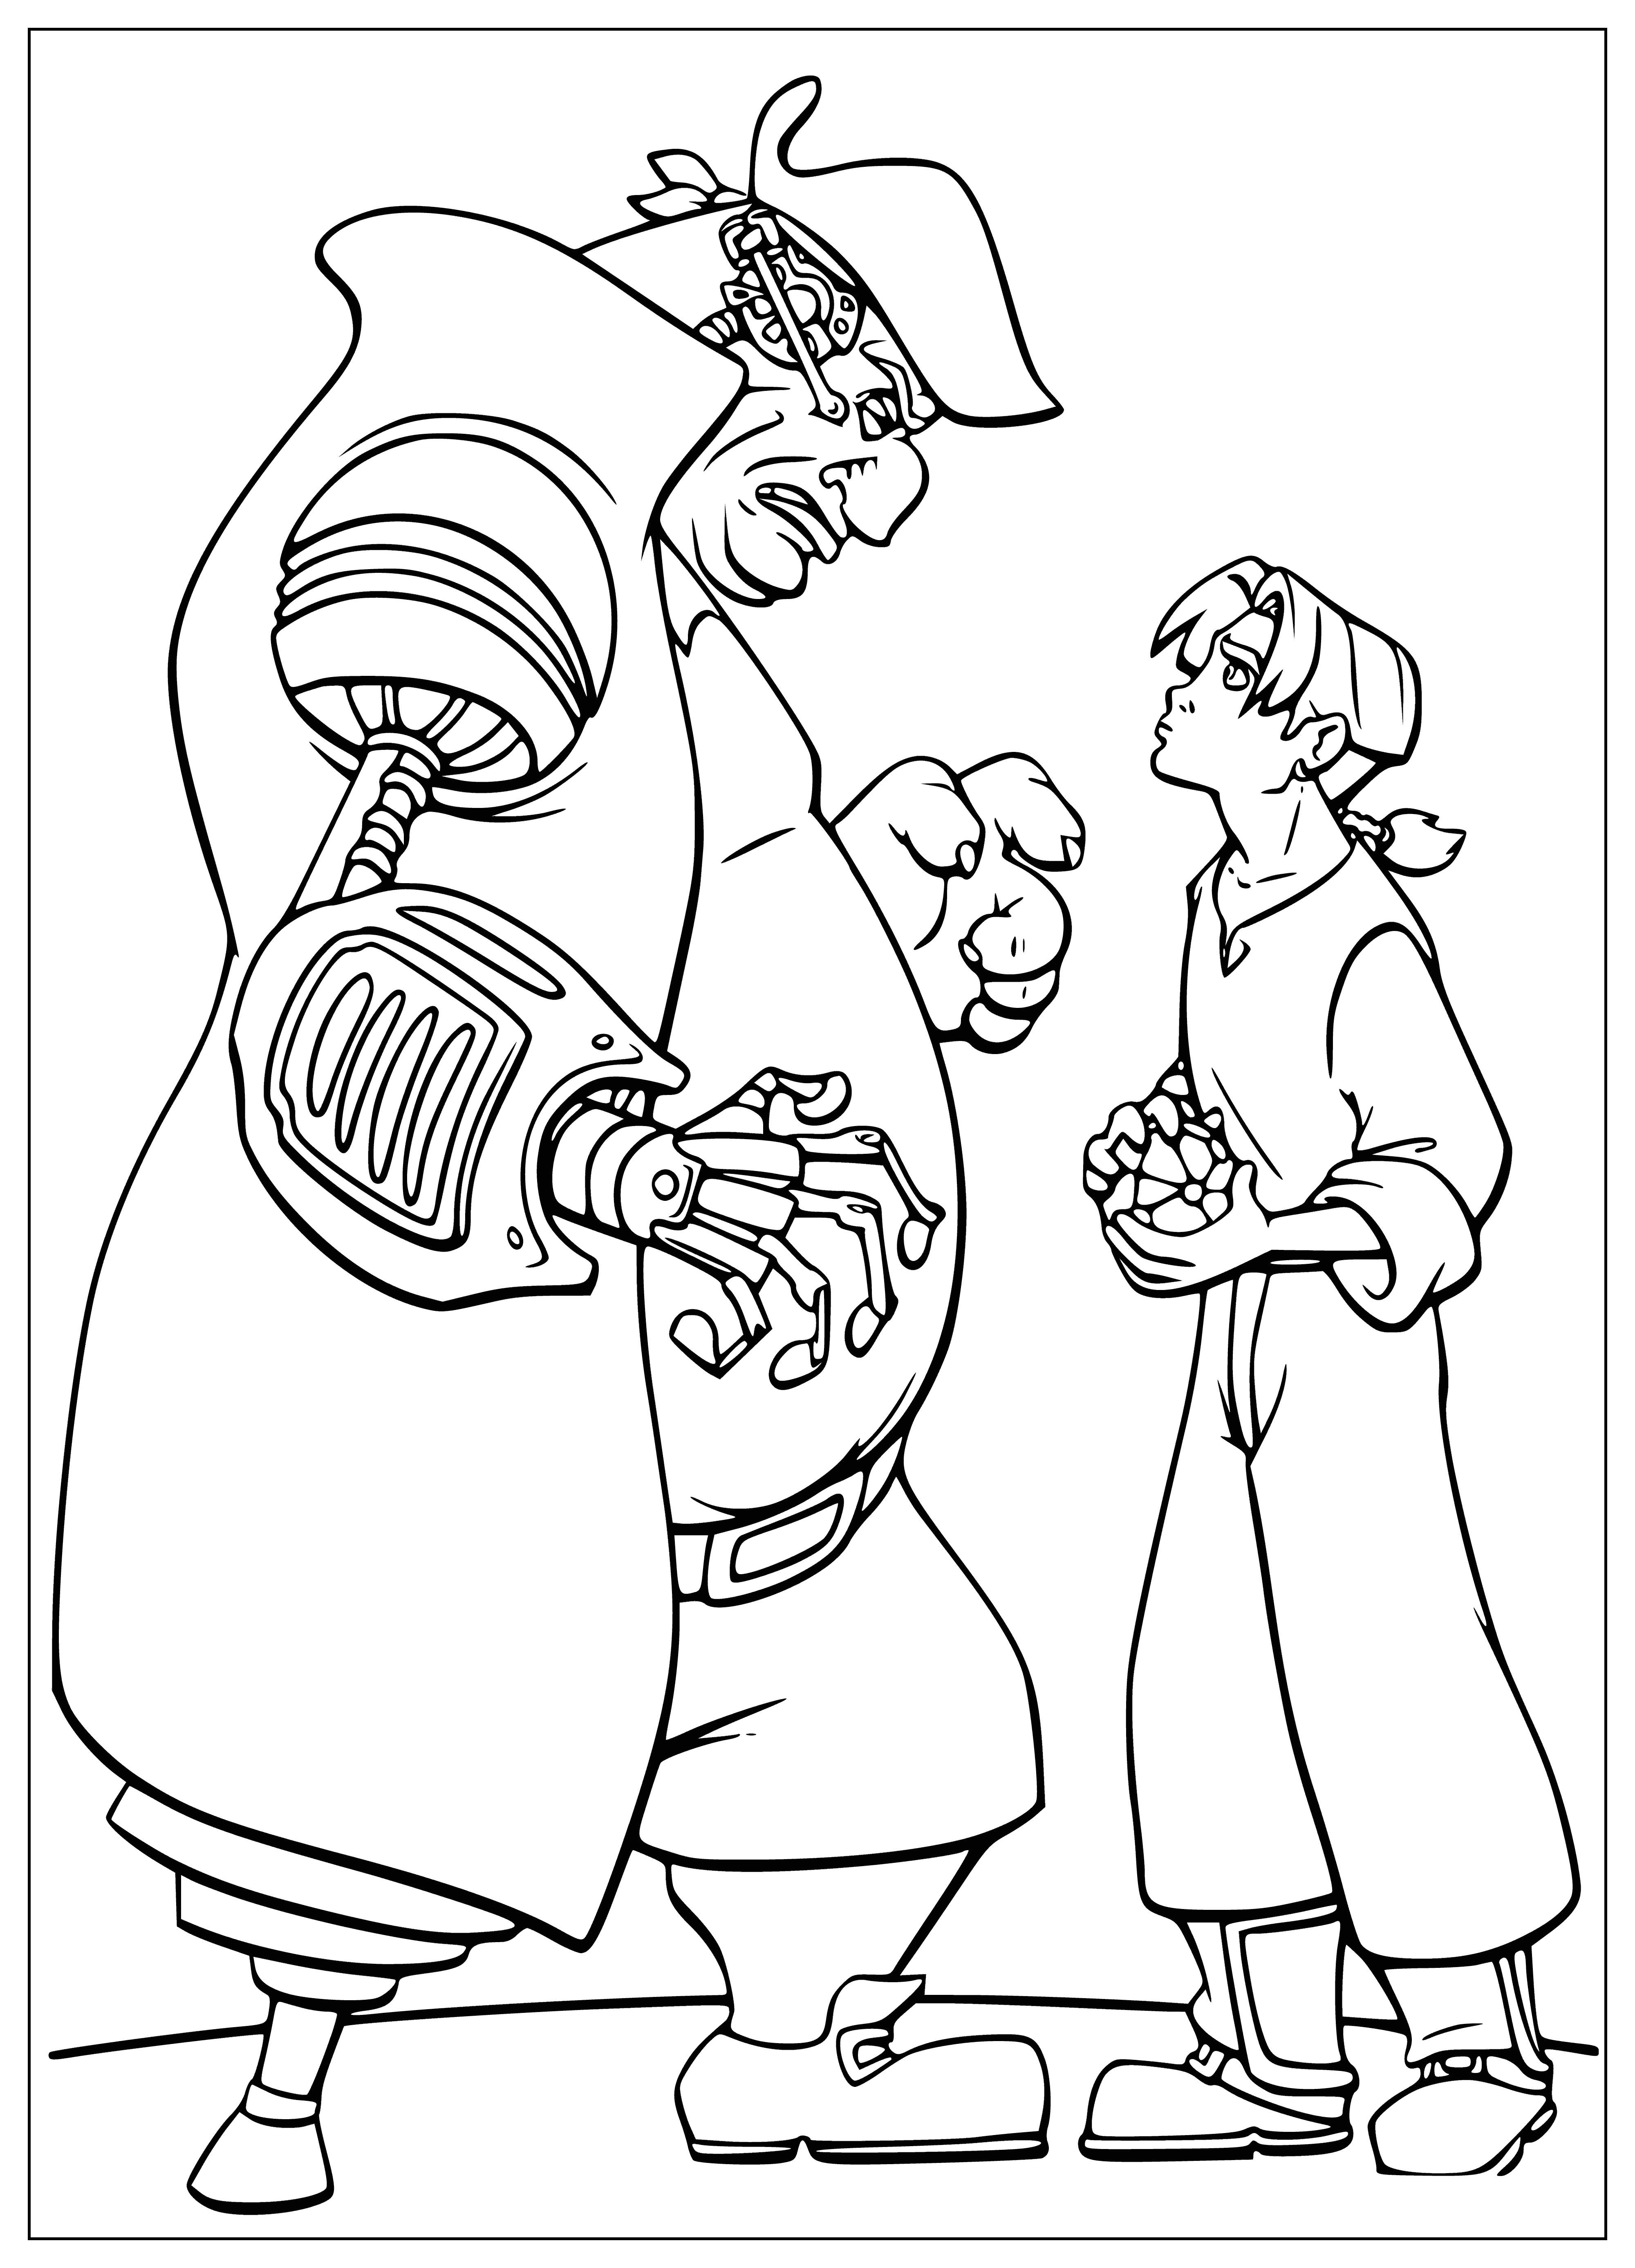 Silver and Jim coloring page